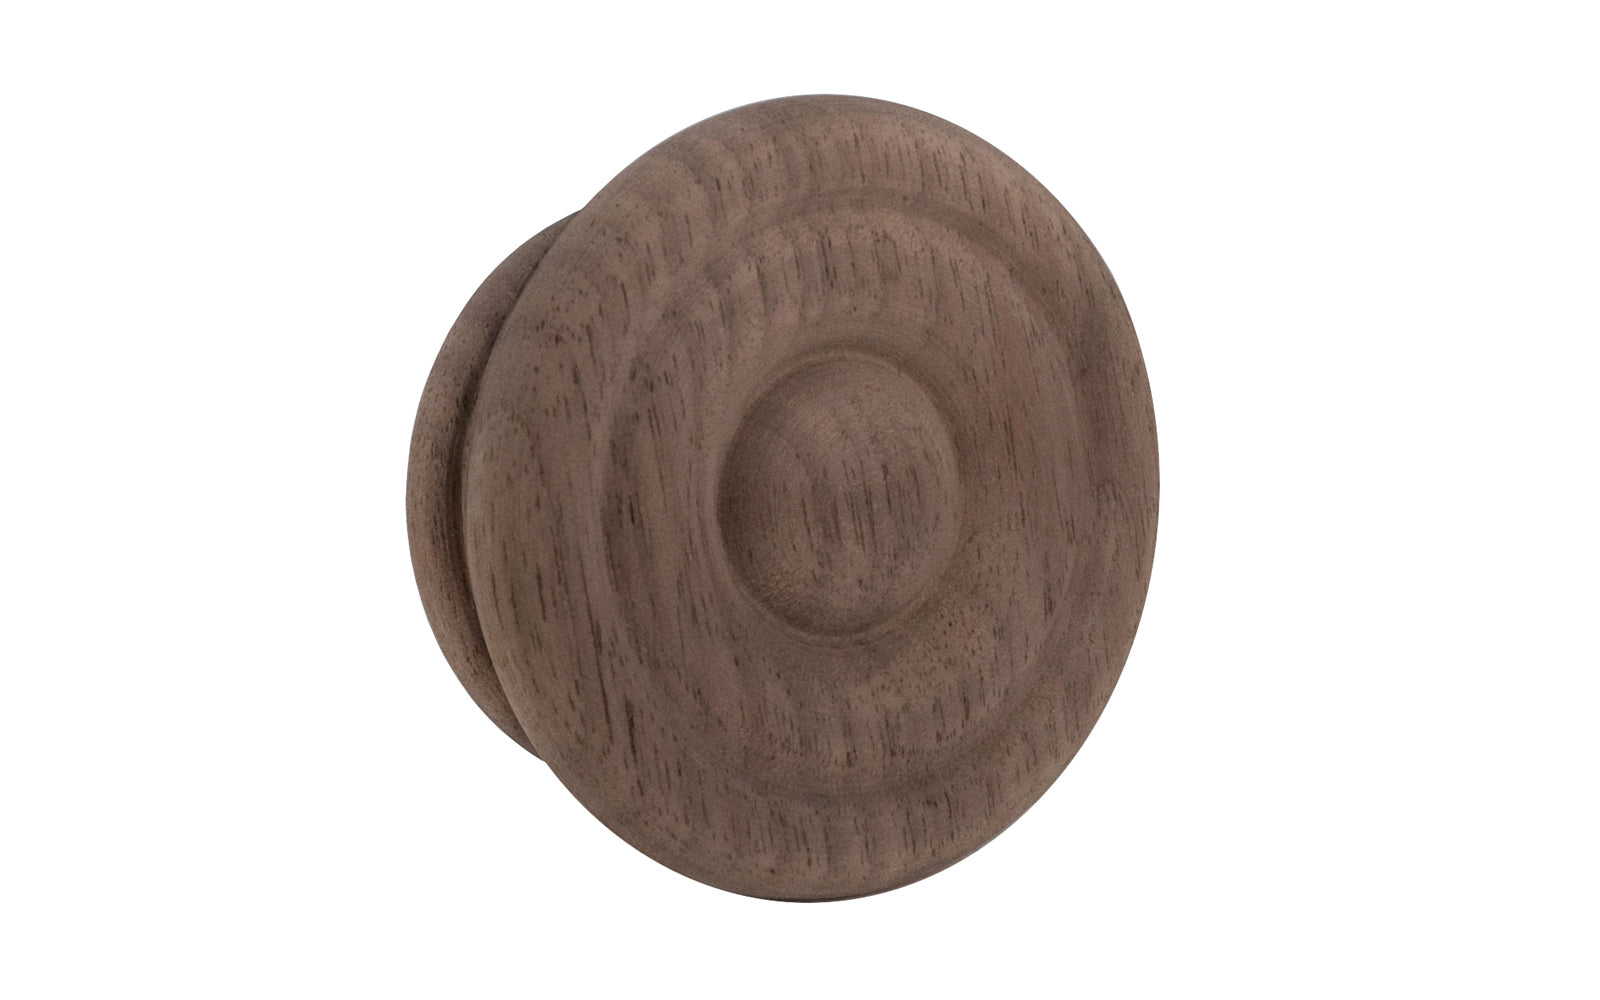 A classic walnut wood round cabinet knob with a smooth ring circle design. They may be stained, painted, or varnished if desired. Late 19th Century style of hardware. Great for a wide variety of uses including drawers, kitchen cabinets, smaller doors, furniture, cabinet doors. 2" Diameter Knob.